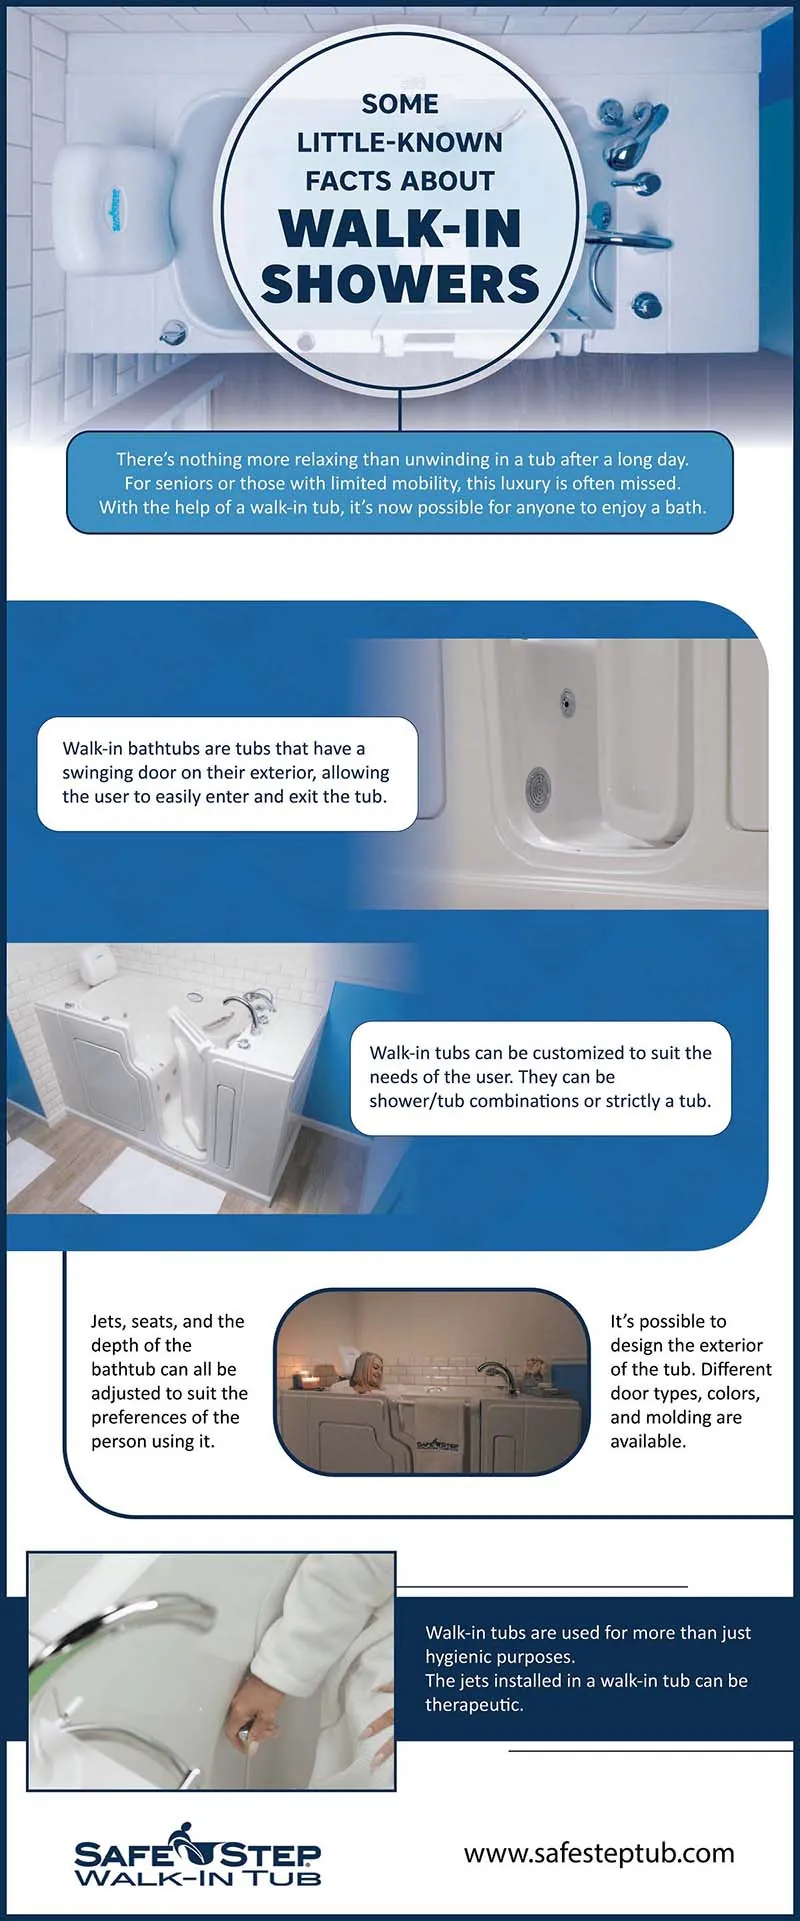 Some Little-Known Facts about Walk-in Showers